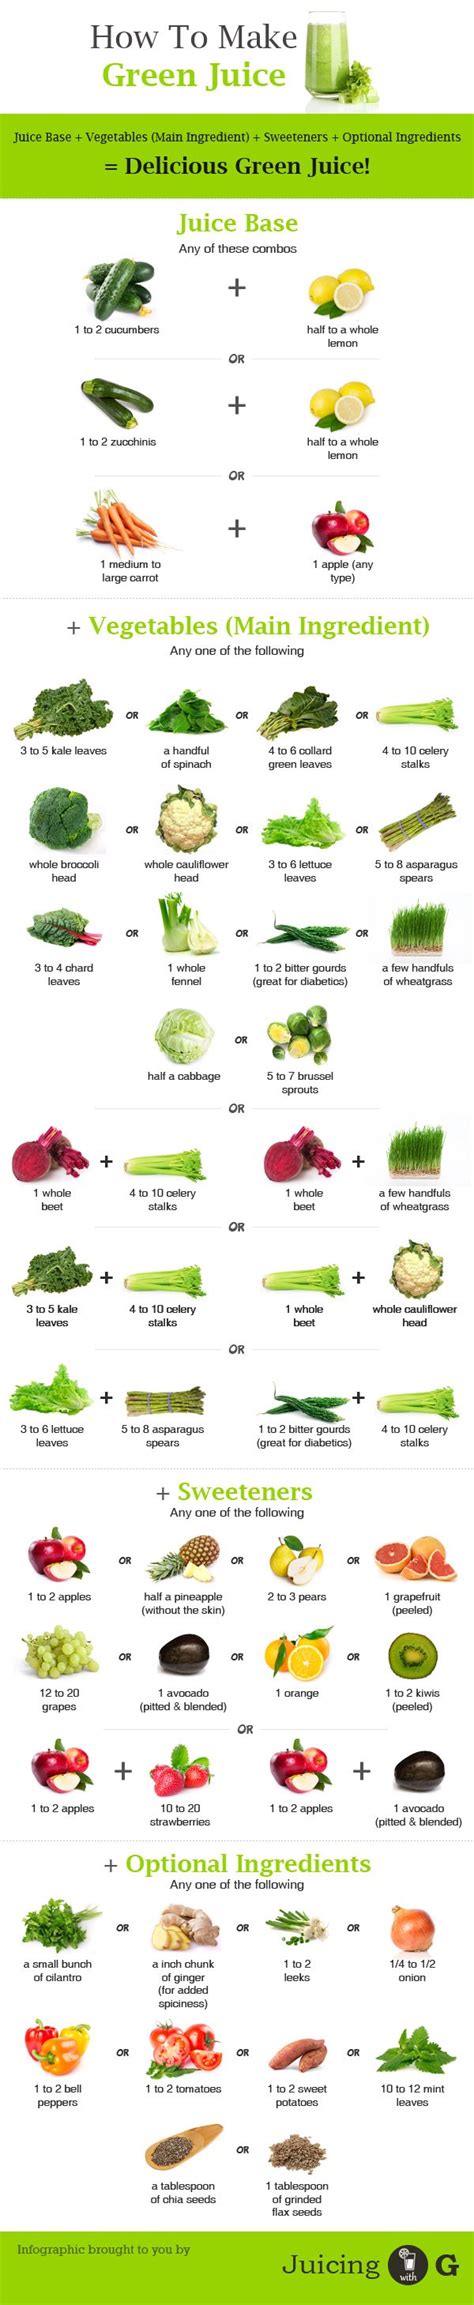 15-healthy-green-juice-recipes-and-how-to-make image